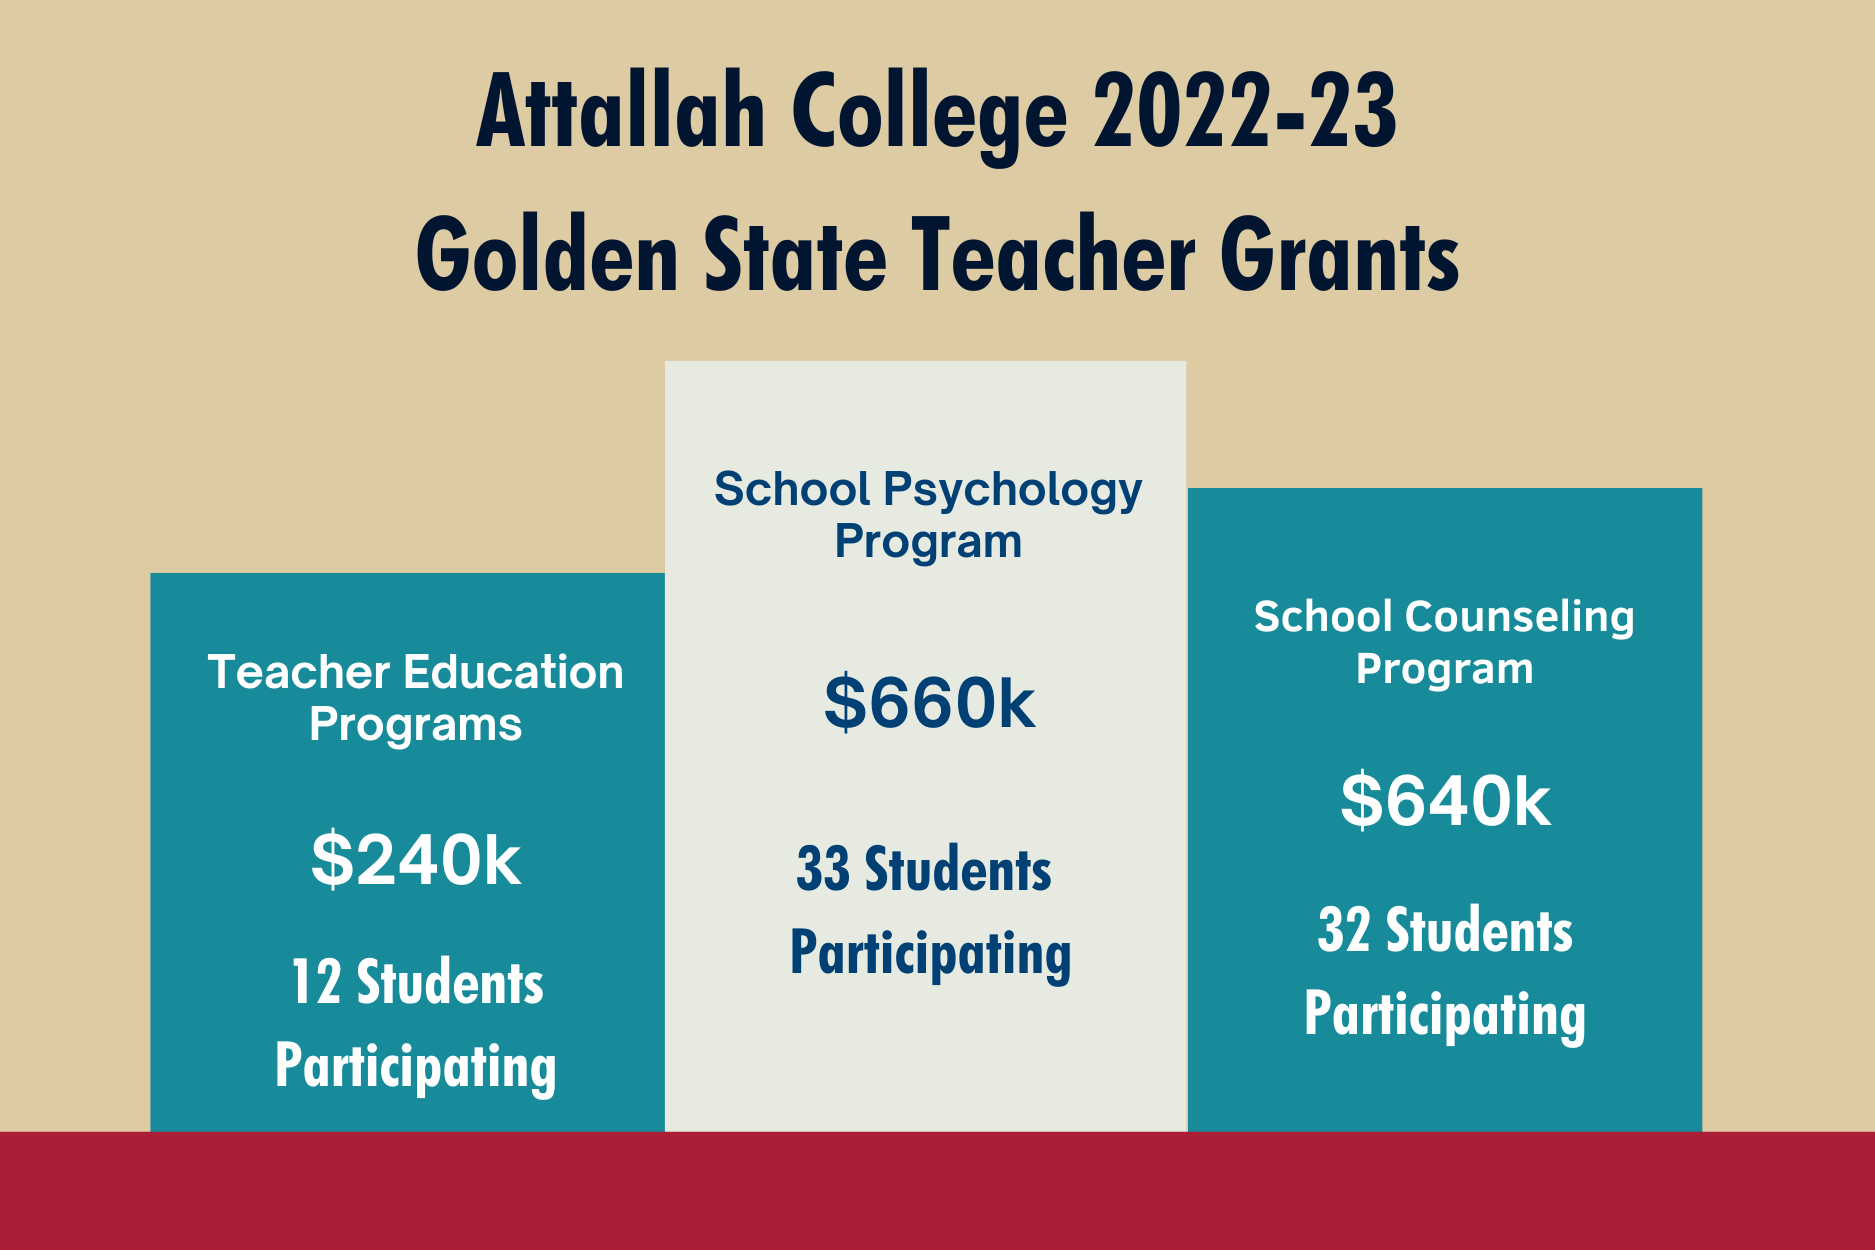 $1,540,000 in Golden State Teacher Grants Offered to Our Attallah College Students